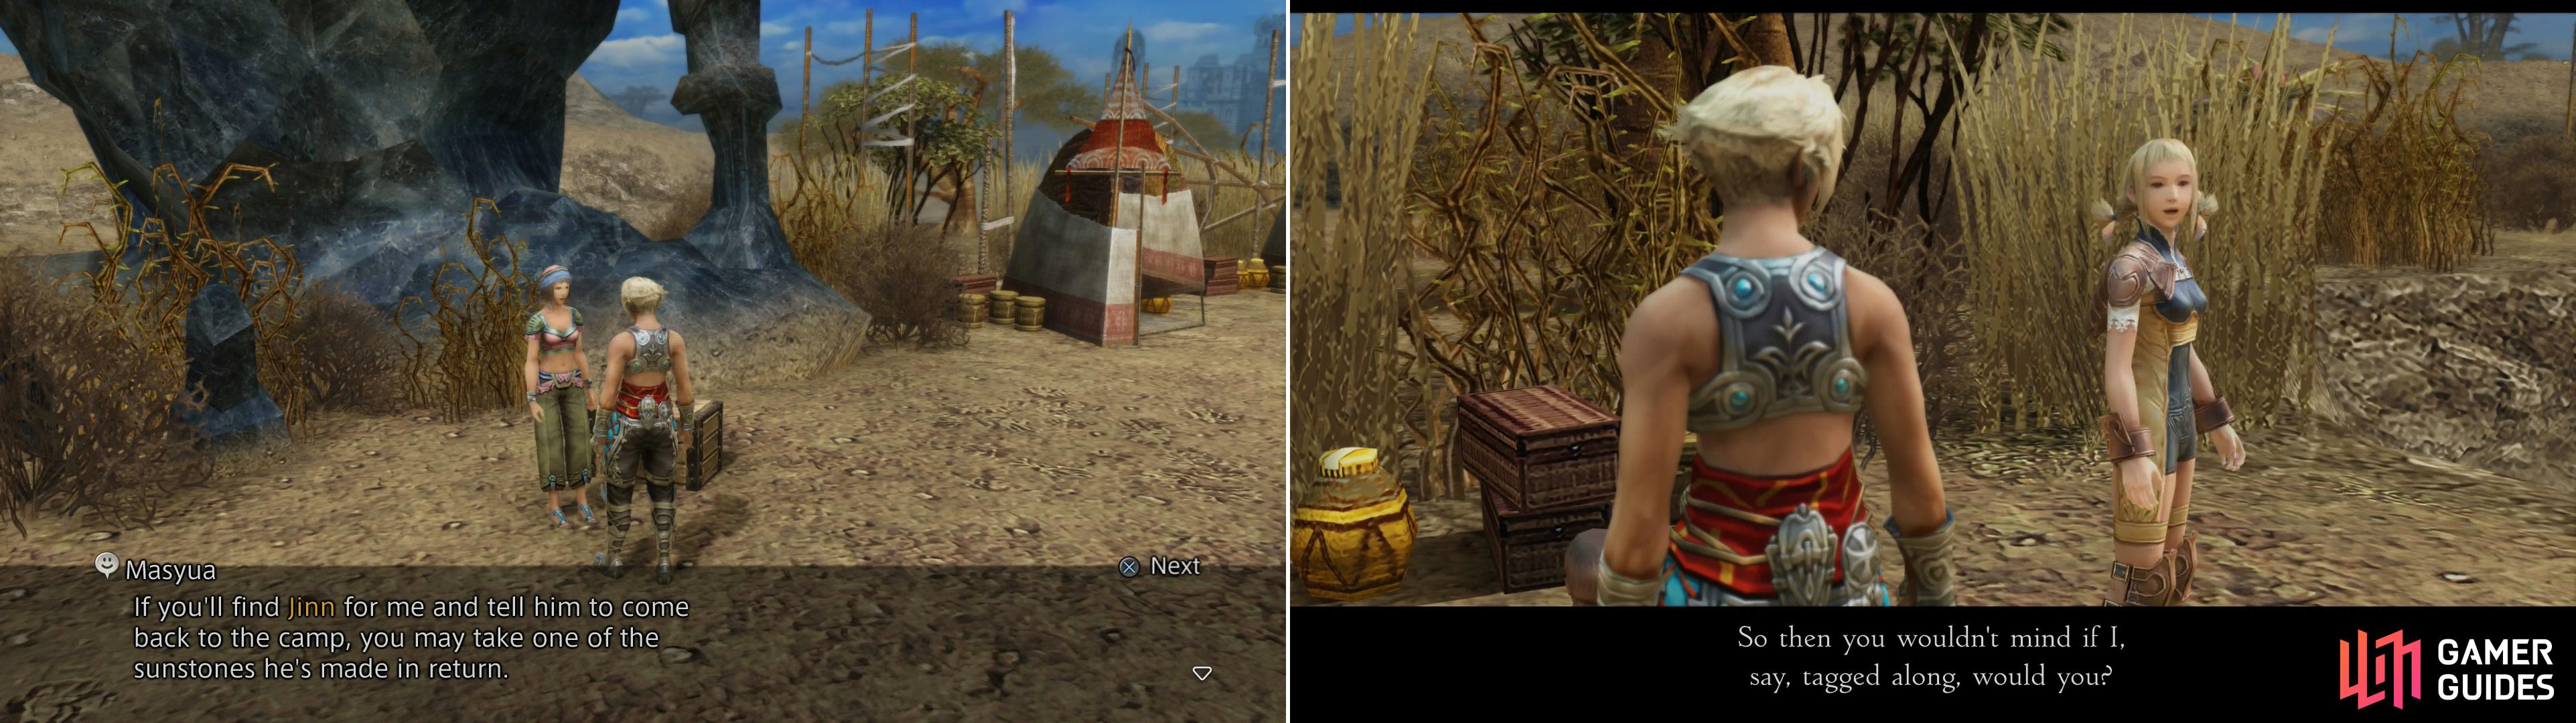 Talk to Masyua near the dark crystal and she’ll off you a job by which you can earn a Sunstone (left). Penelo will stop you as you leave the Nomad Village and insist on joining you (right).